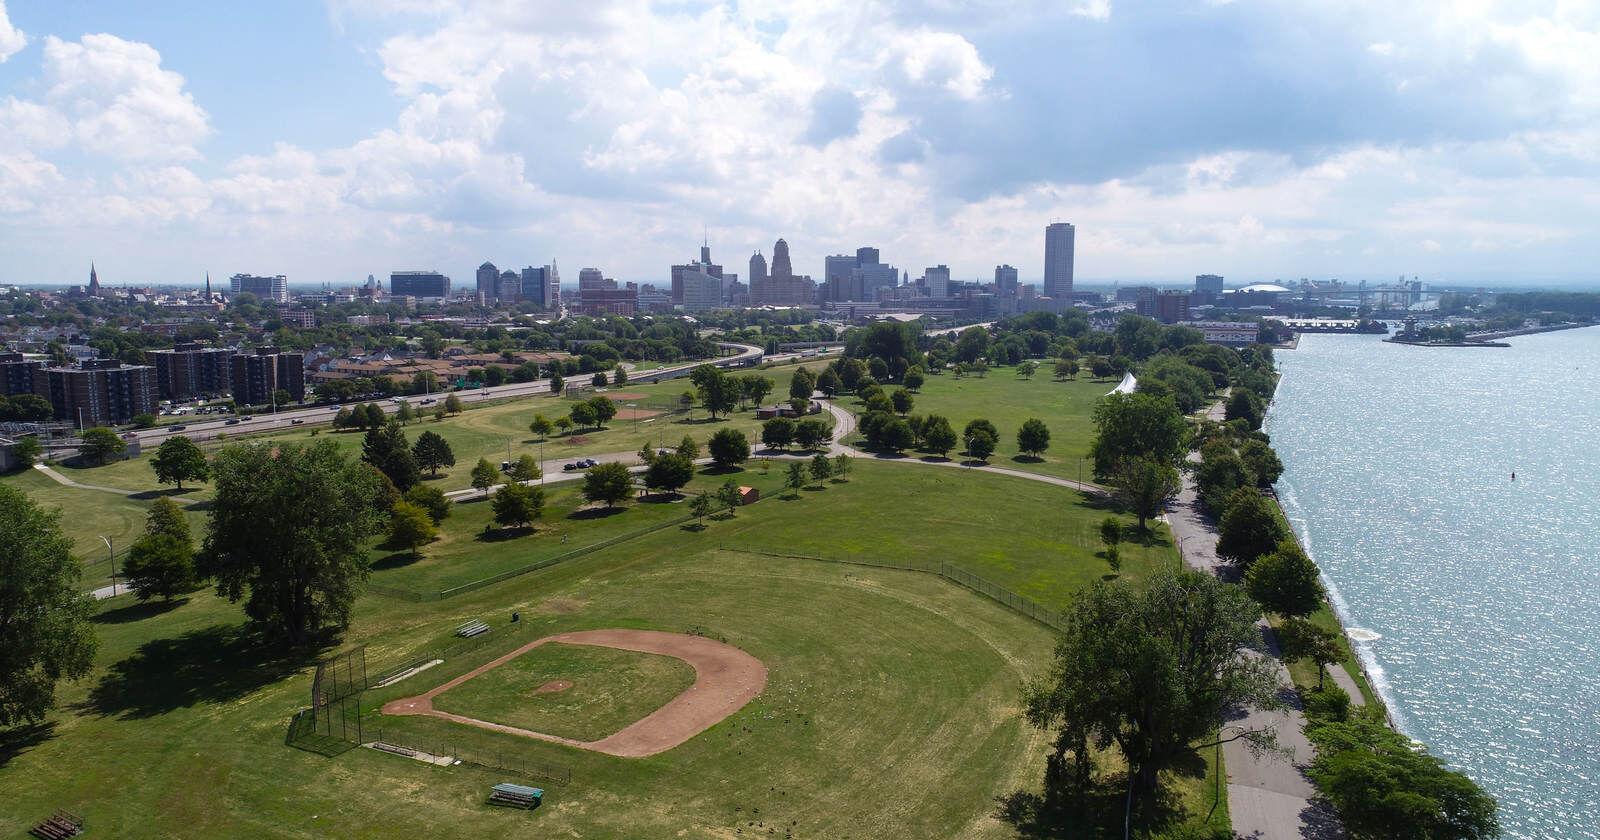 After years of planning, construction to start on $110 million Wilson Centennial Park project